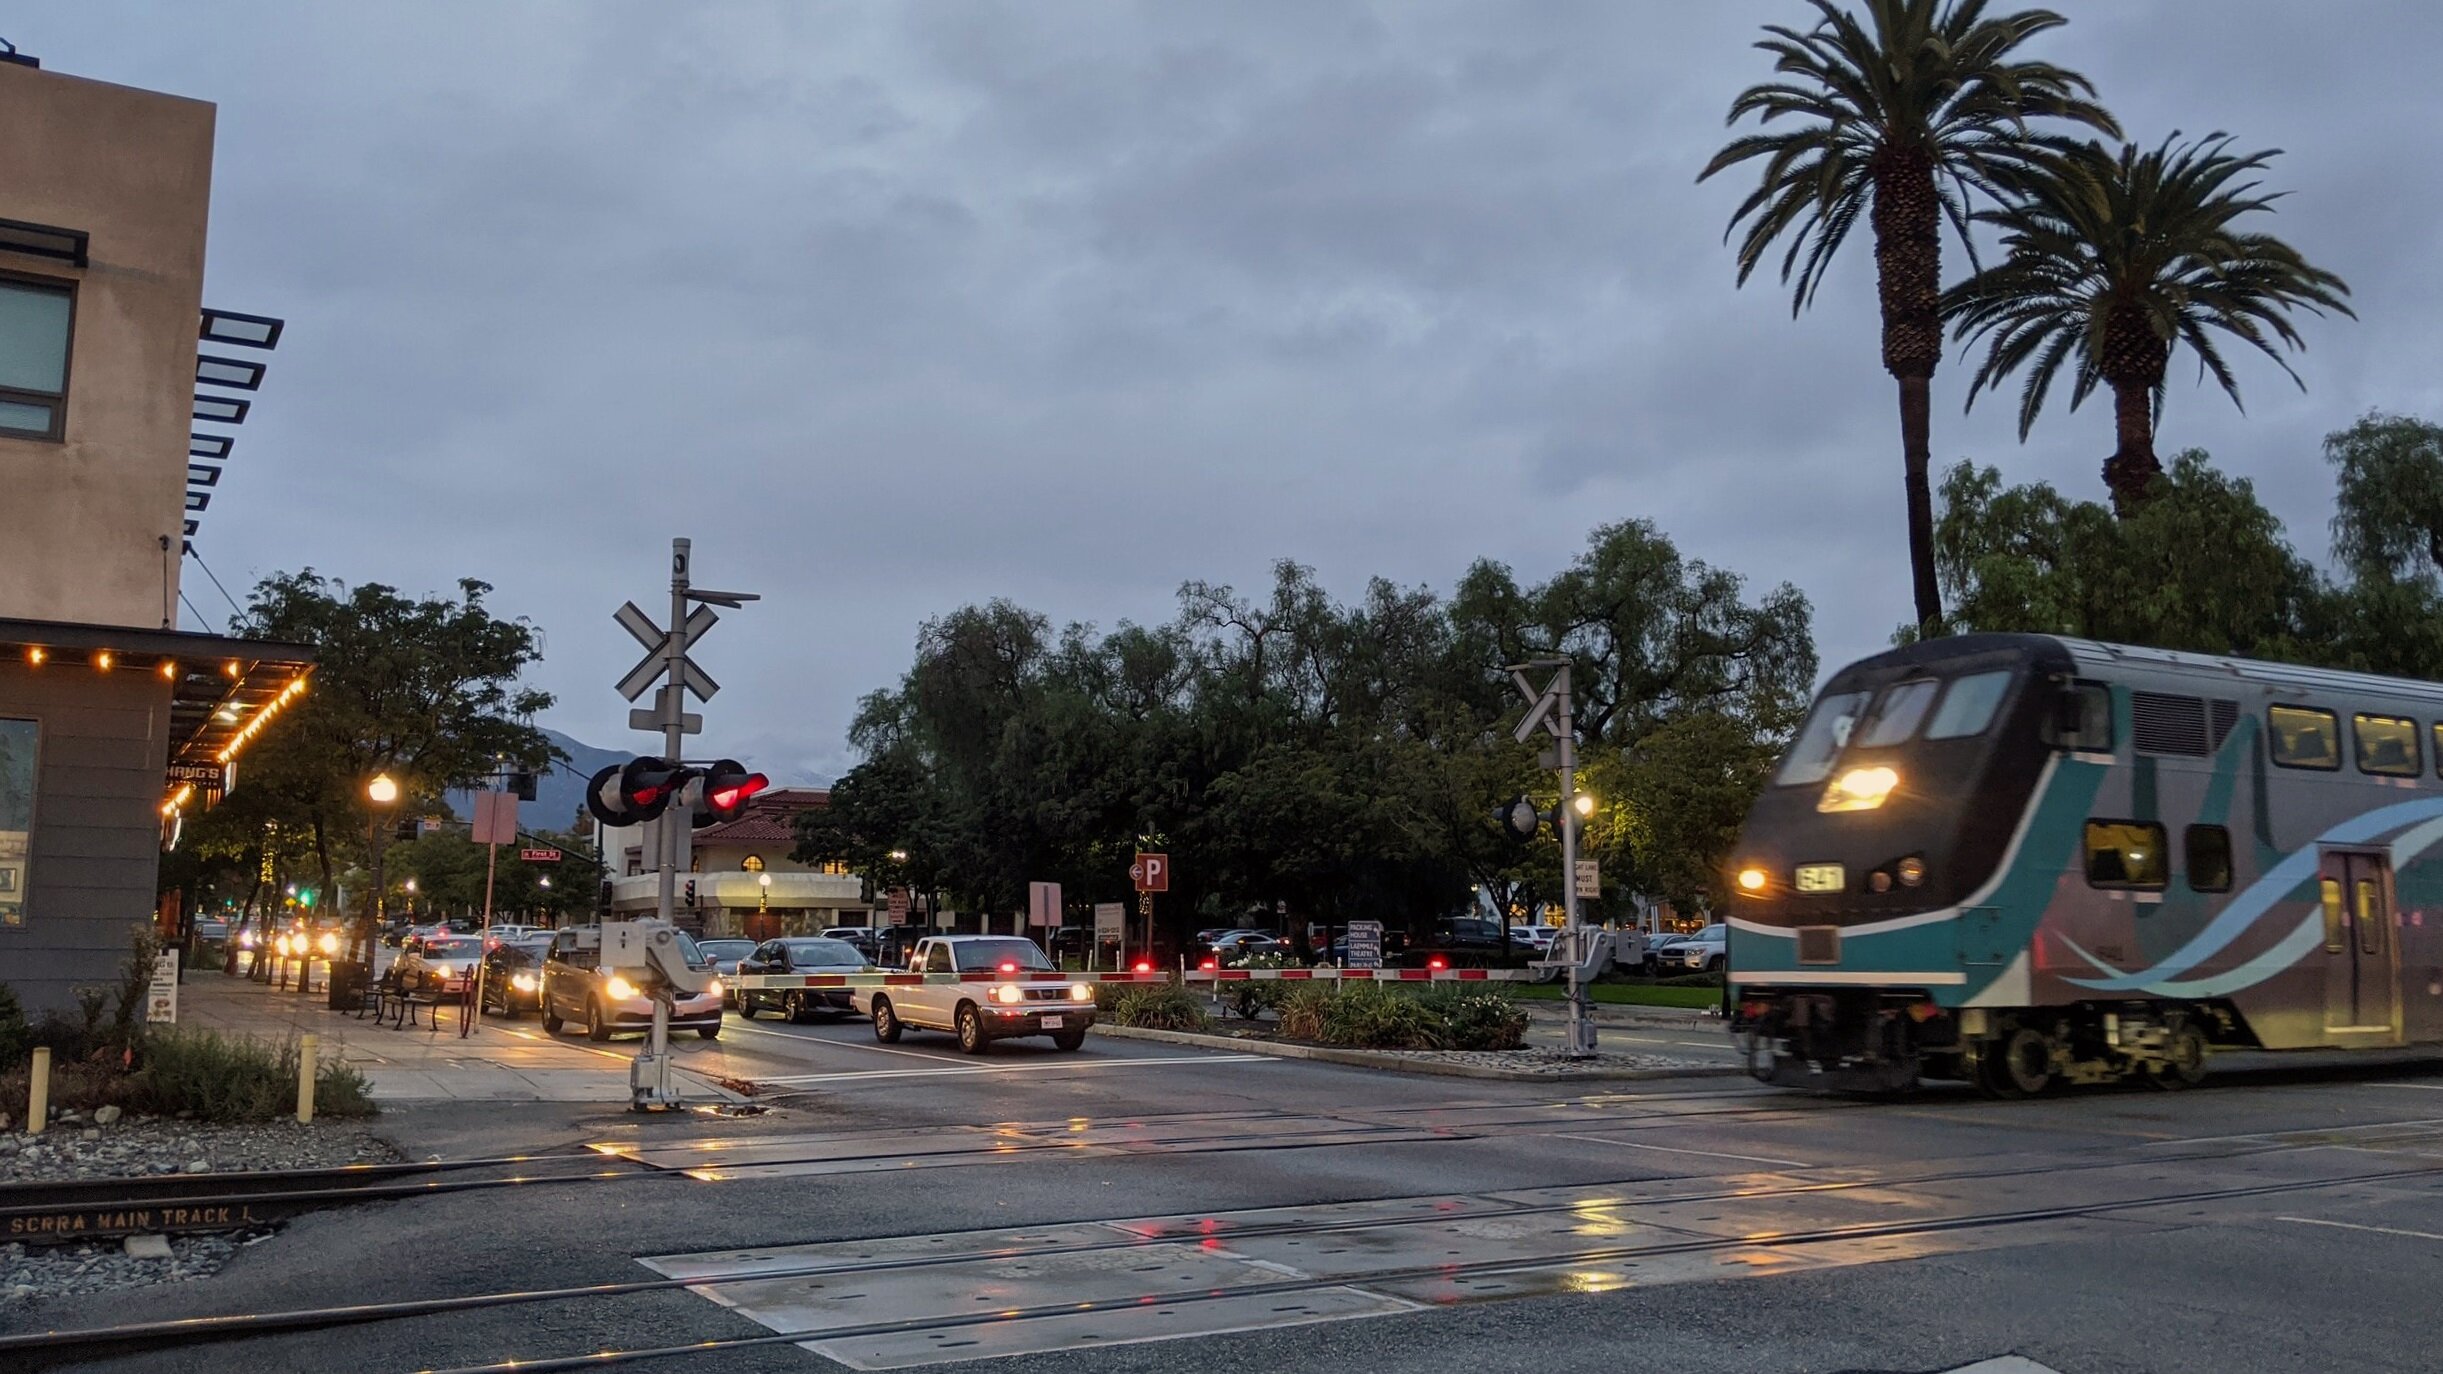  A westbound Metrolink train crosses Indian Hill Avenue in Claremont, CA. Photo by Alex Lewis, 2019.  